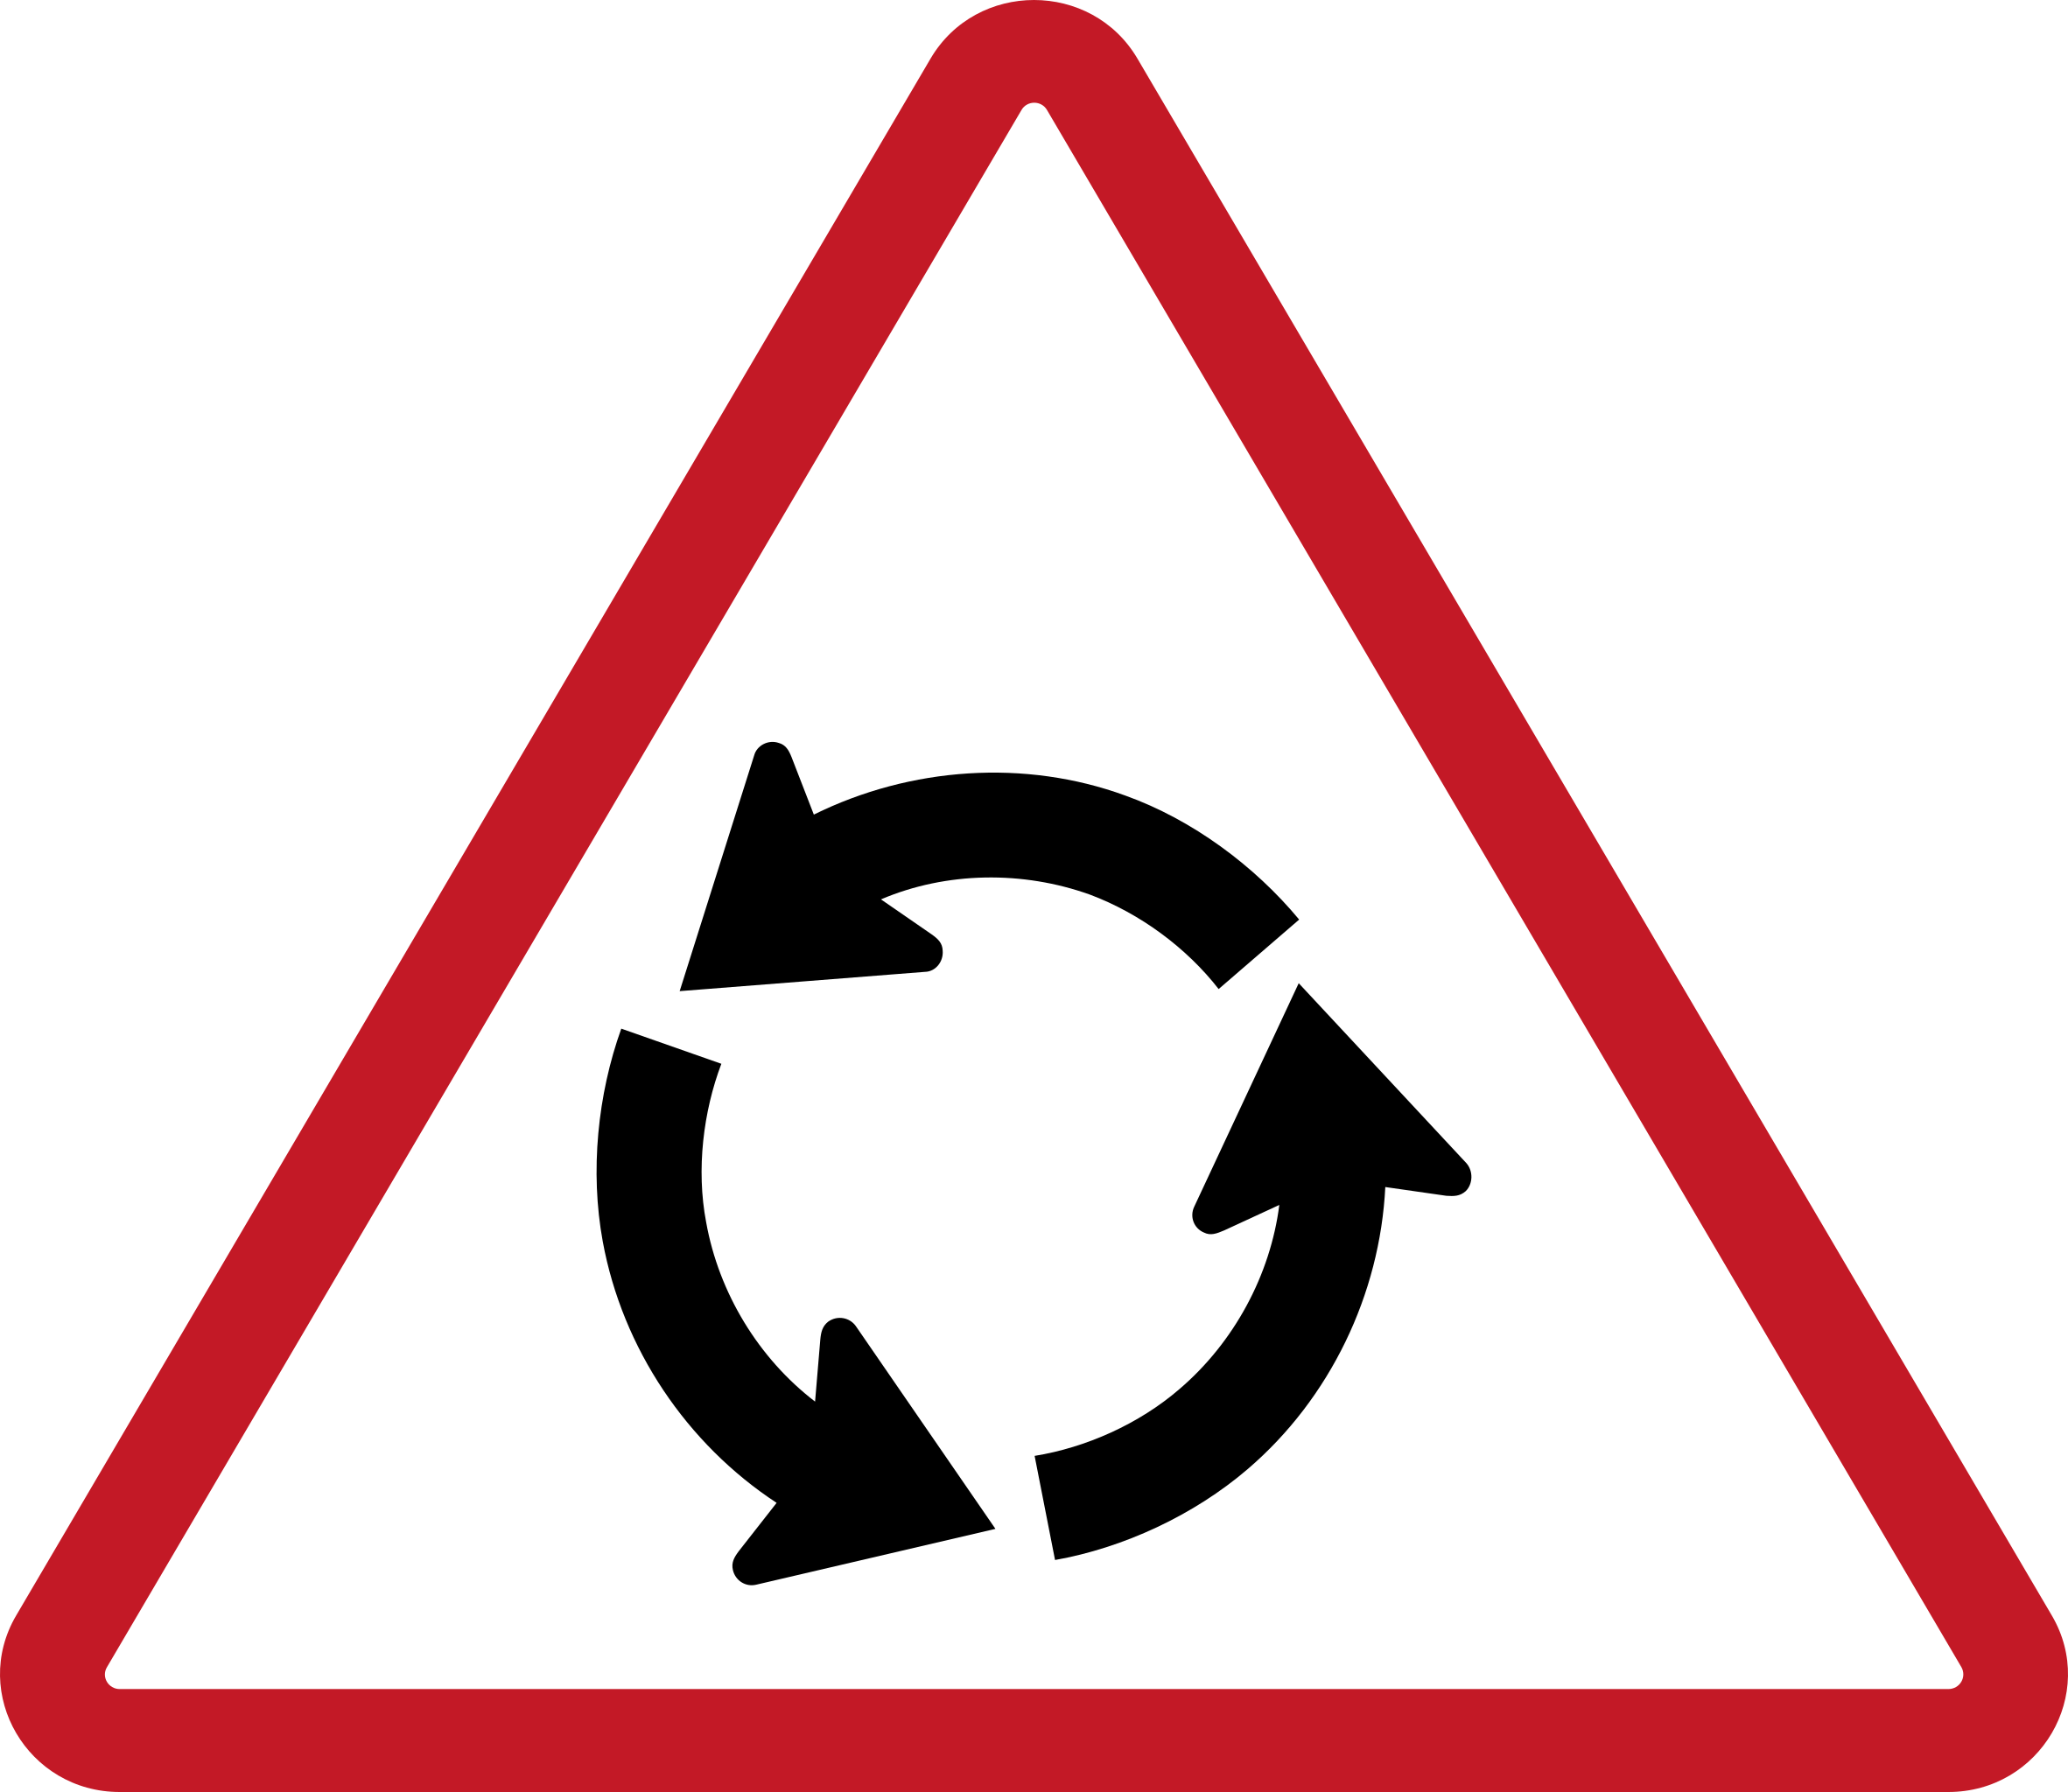 File:Philippines Road Sign W2-7.Svg - Wikimedia Commons